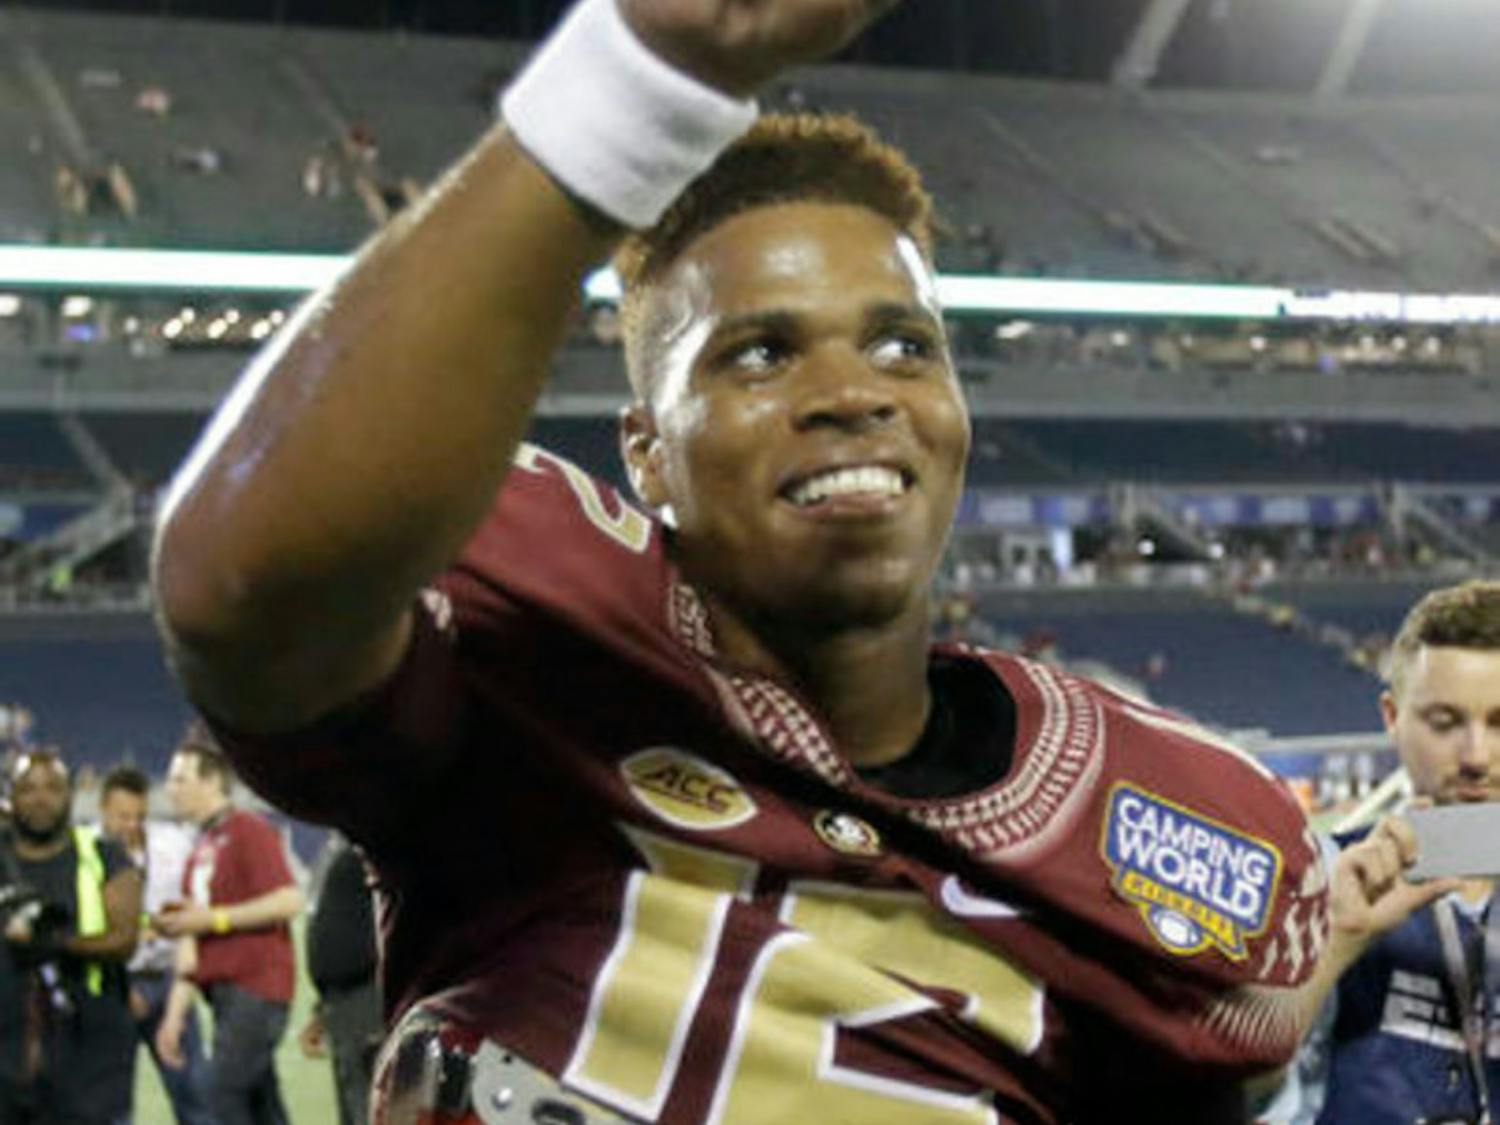 Florida State quarterback Deondre Francois points to cheering fans after defeating Mississippi 45-34 in an NCAA college football game, Tuesday, Sept. 6, 2016, in Orlando, Fla. (AP Photo/John Raoux)